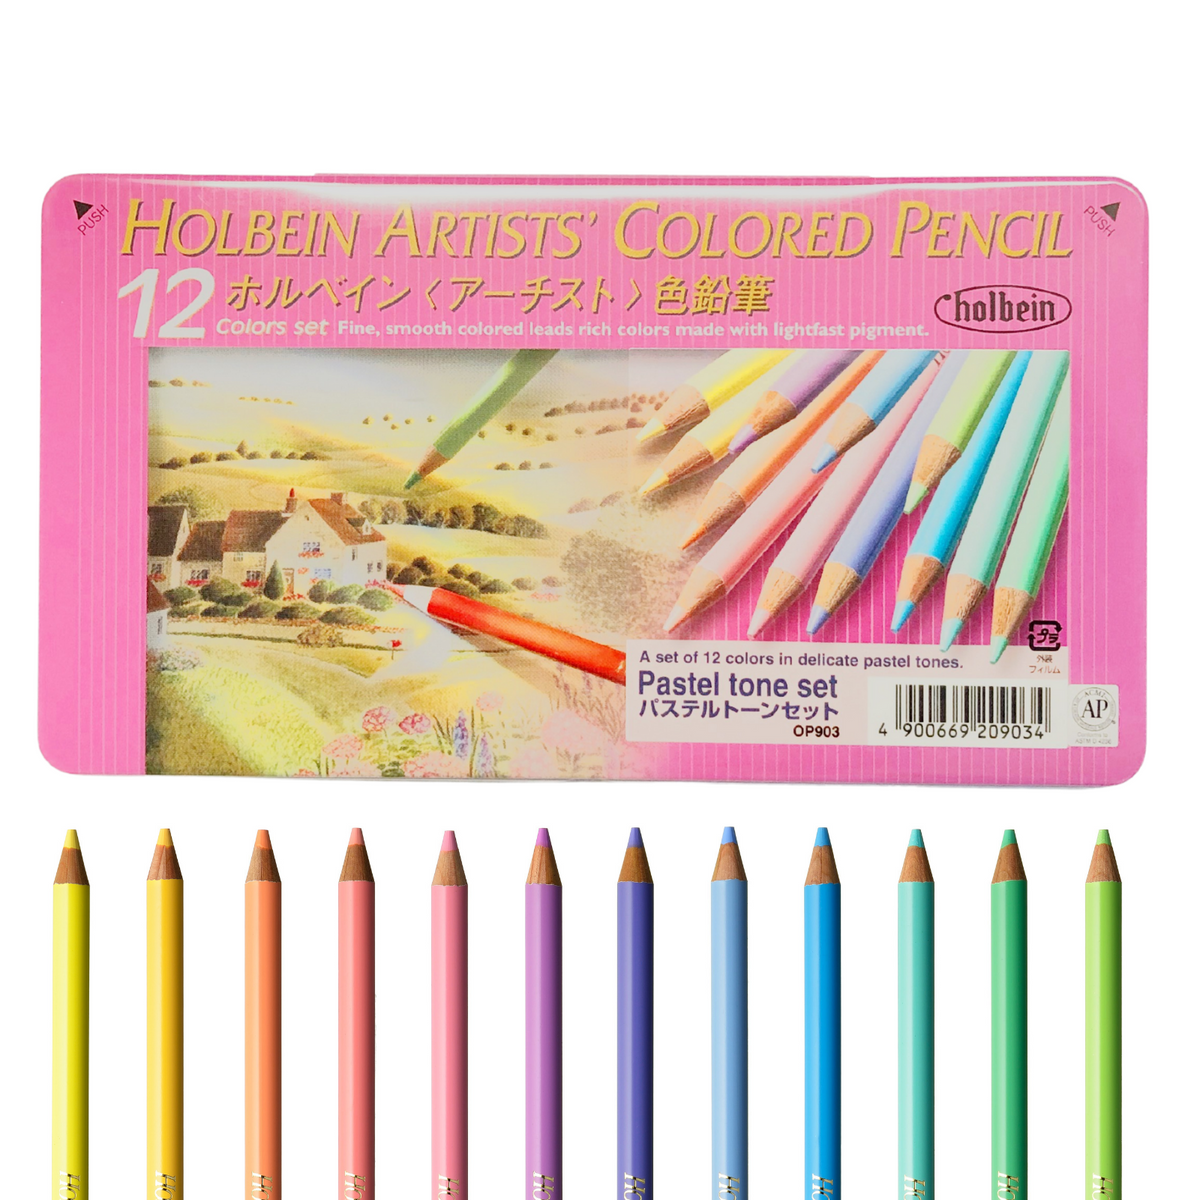 Holbein Colored Pencils, 12 Pastel Tones, 12 Basic Tones, 12 Design Tones  Review and Swatches